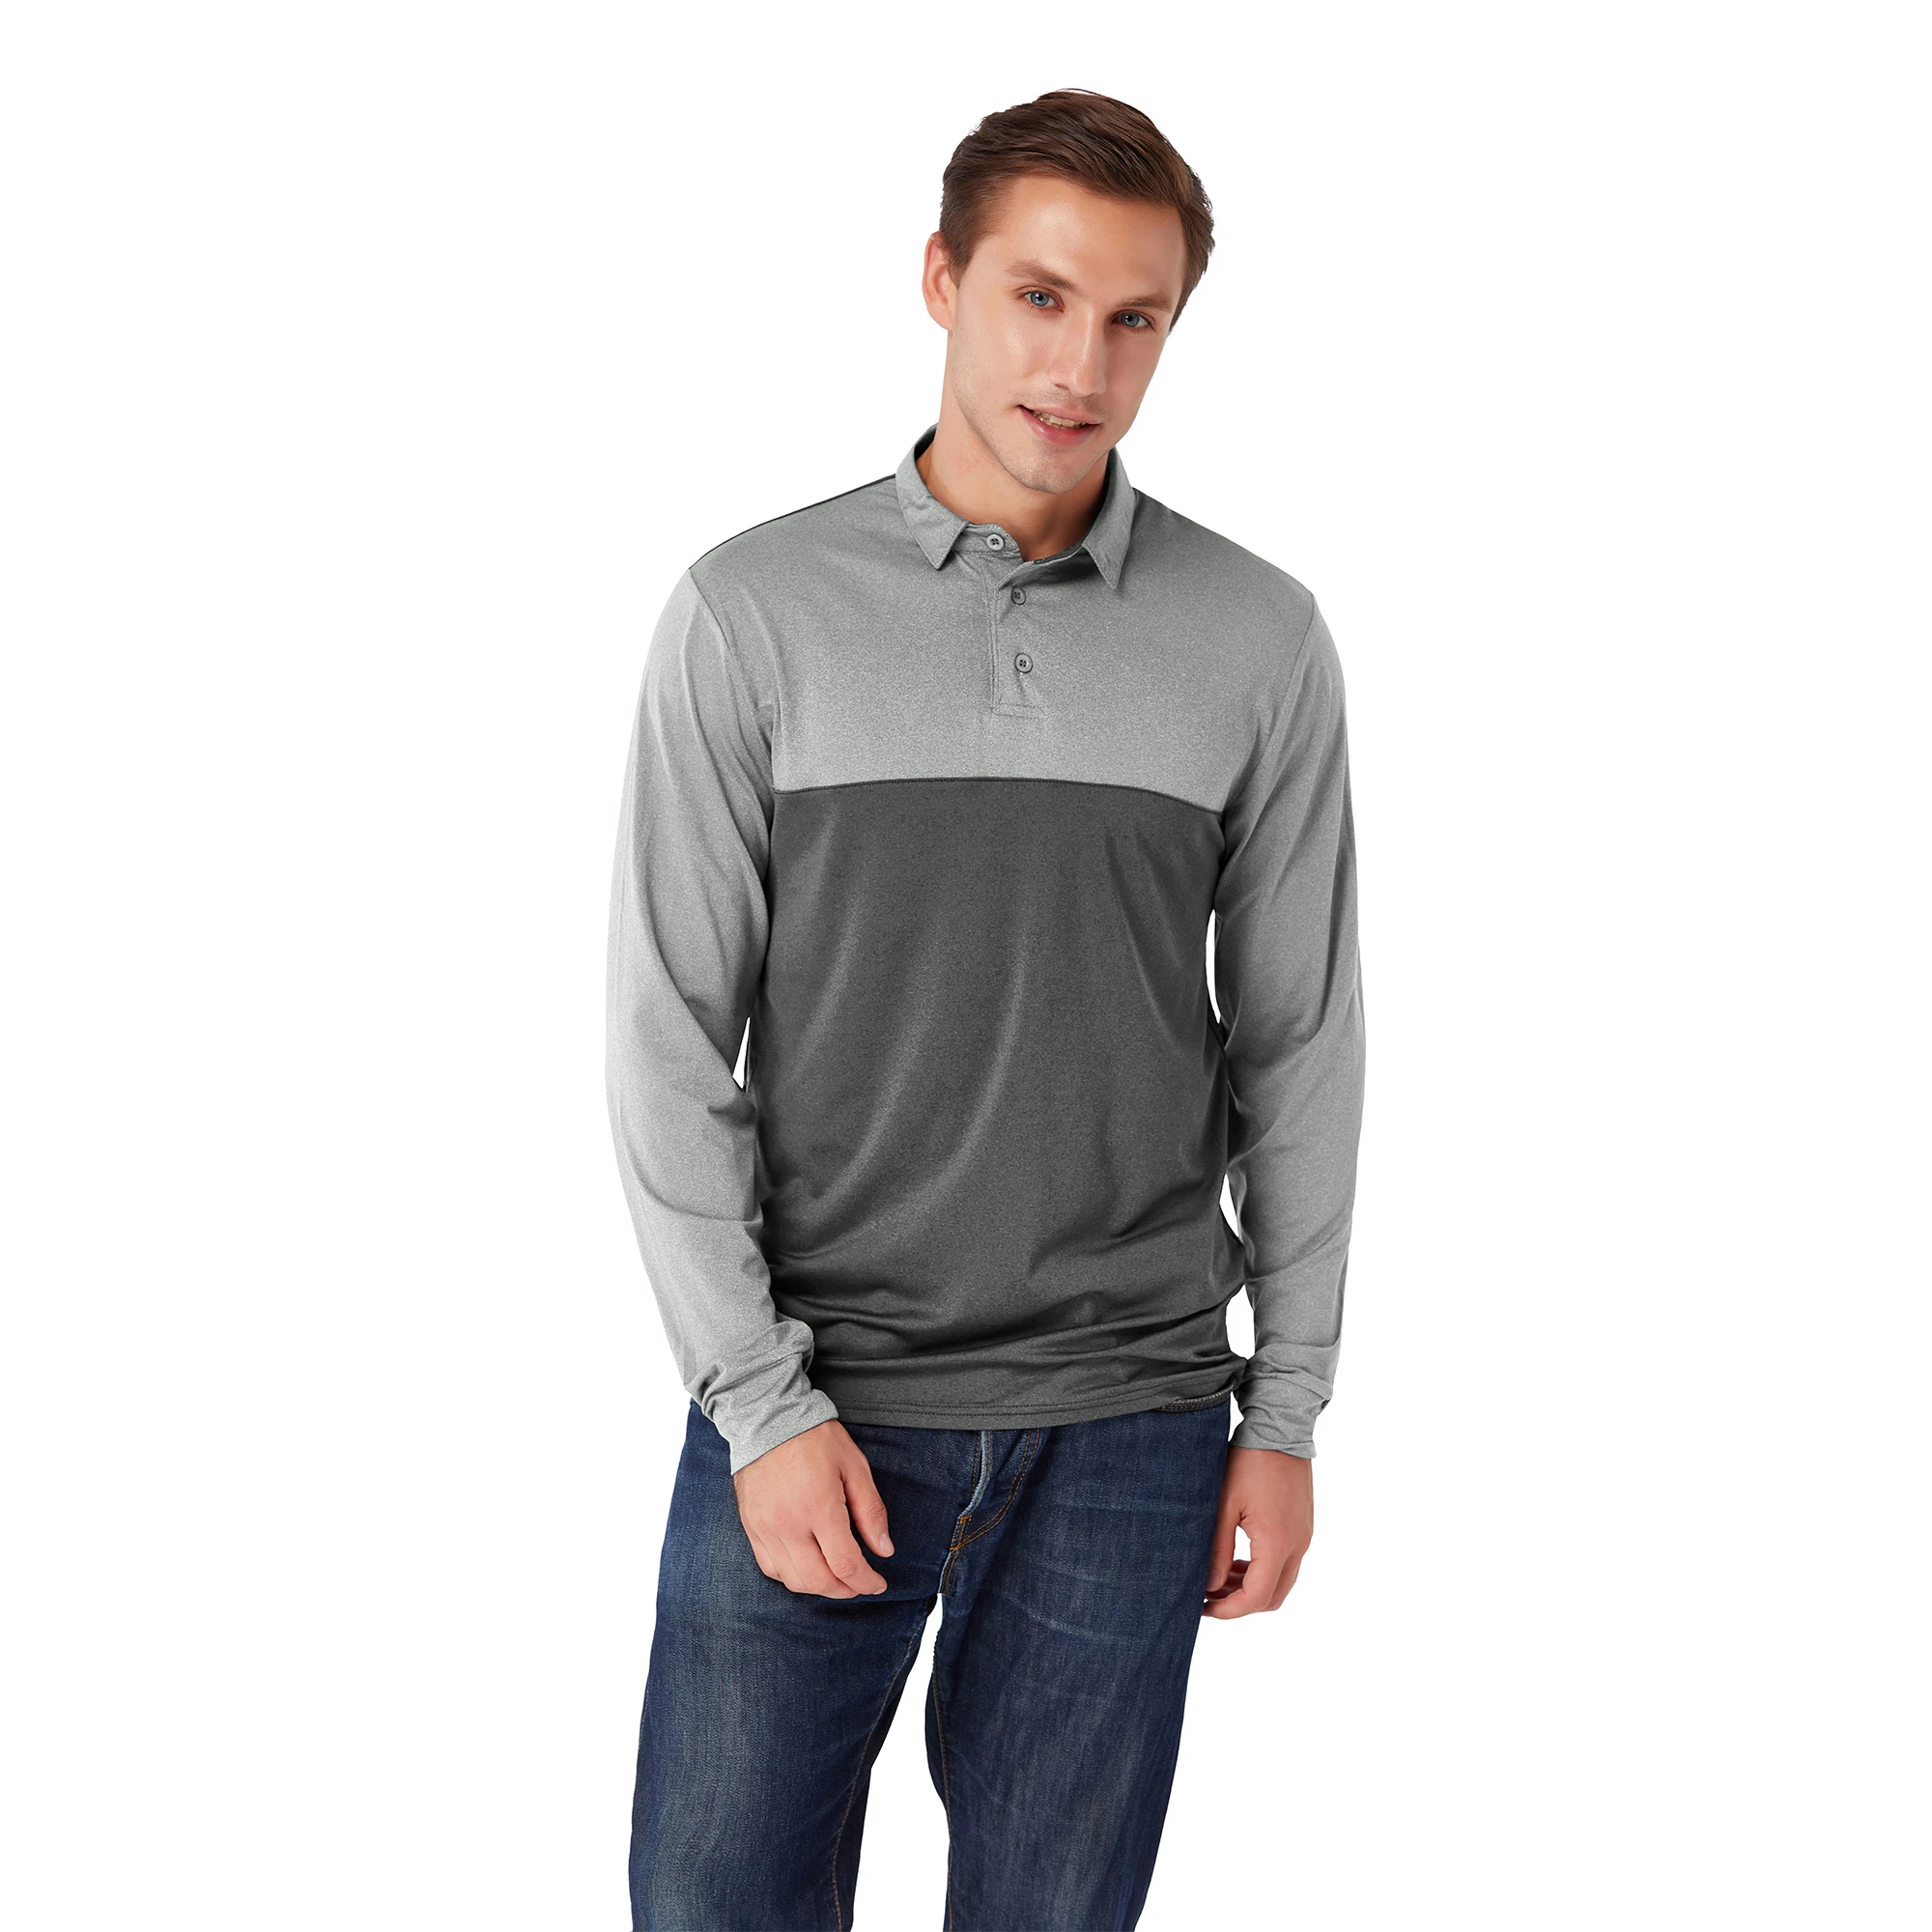 Custom two tone color block quick dry long sleeve golf polo t shirt